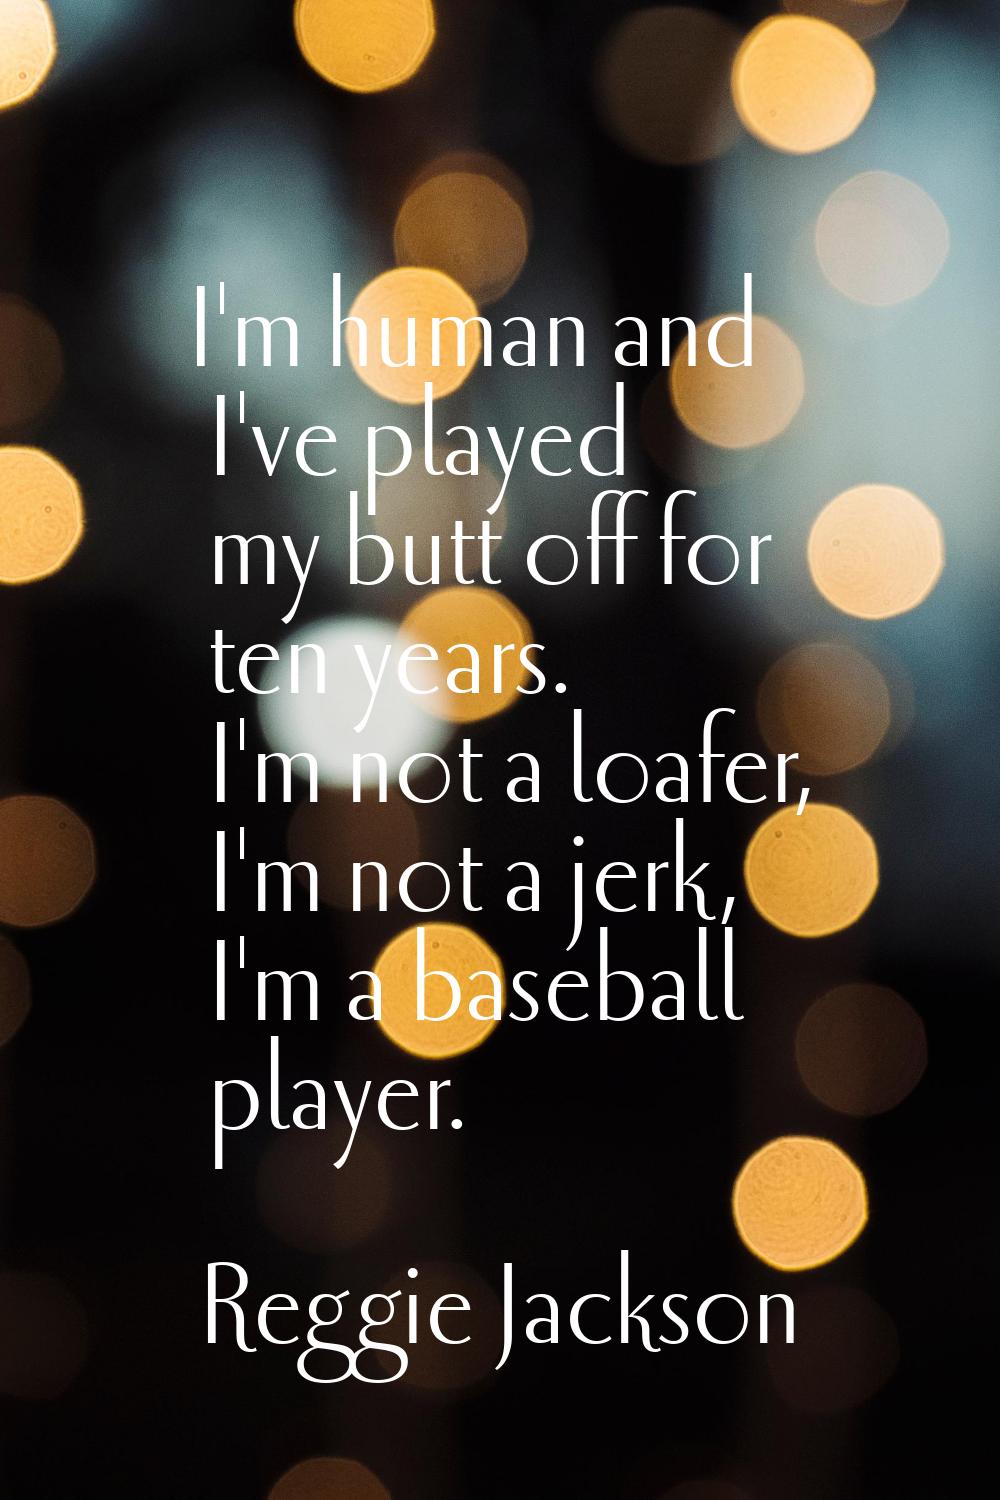 I'm human and I've played my butt off for ten years. I'm not a loafer, I'm not a jerk, I'm a baseba